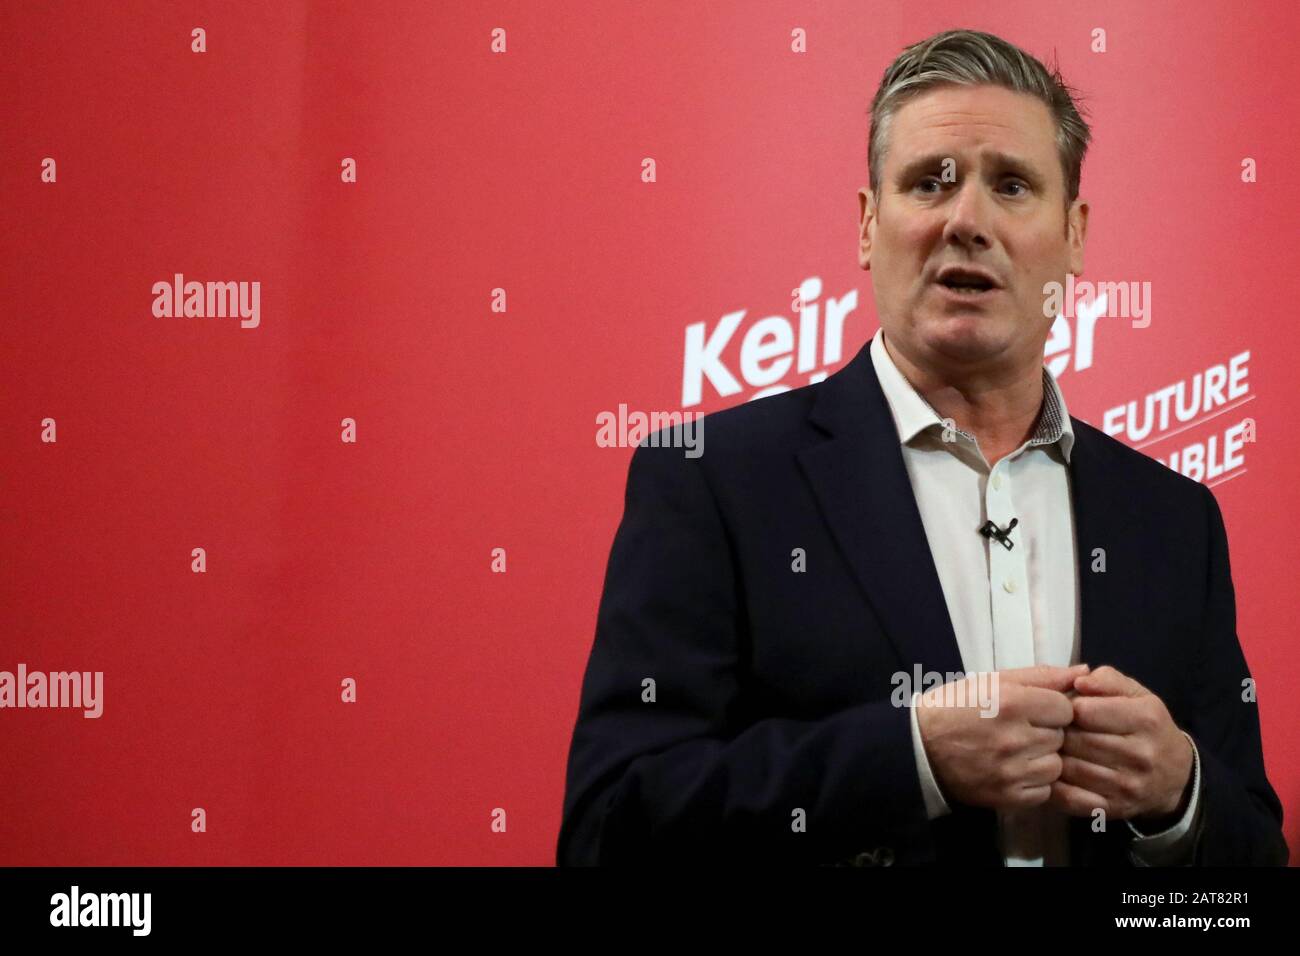 London / UK – January 31, 2020: Keir Starmer, running to be leader of the Labour Party, gives a speech at Westminster Cathedral Hall on Brexit day Stock Photo